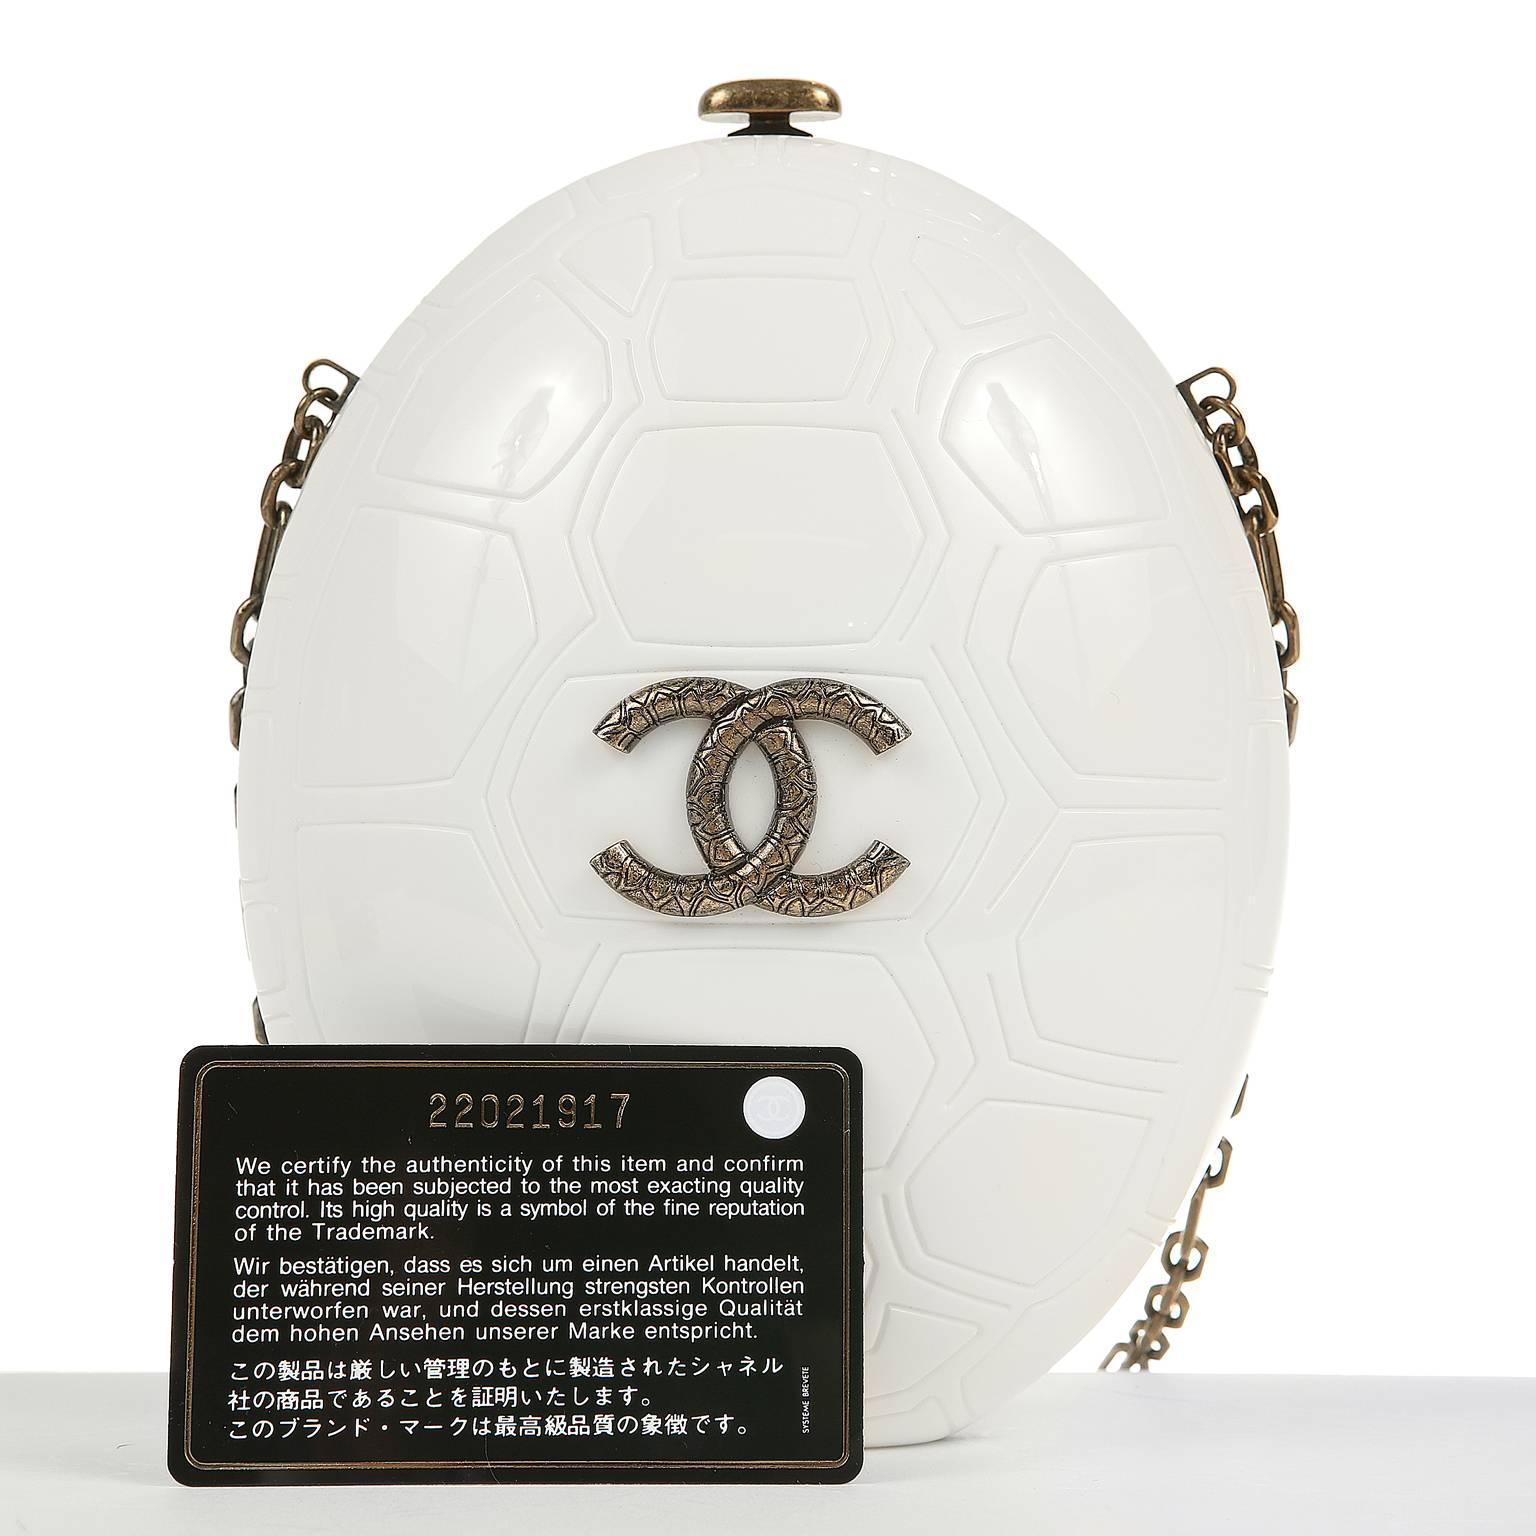 Chanel Ivory Resin Turtle Shell Print Bag with Strap- 2016 CRUISE For Sale 5